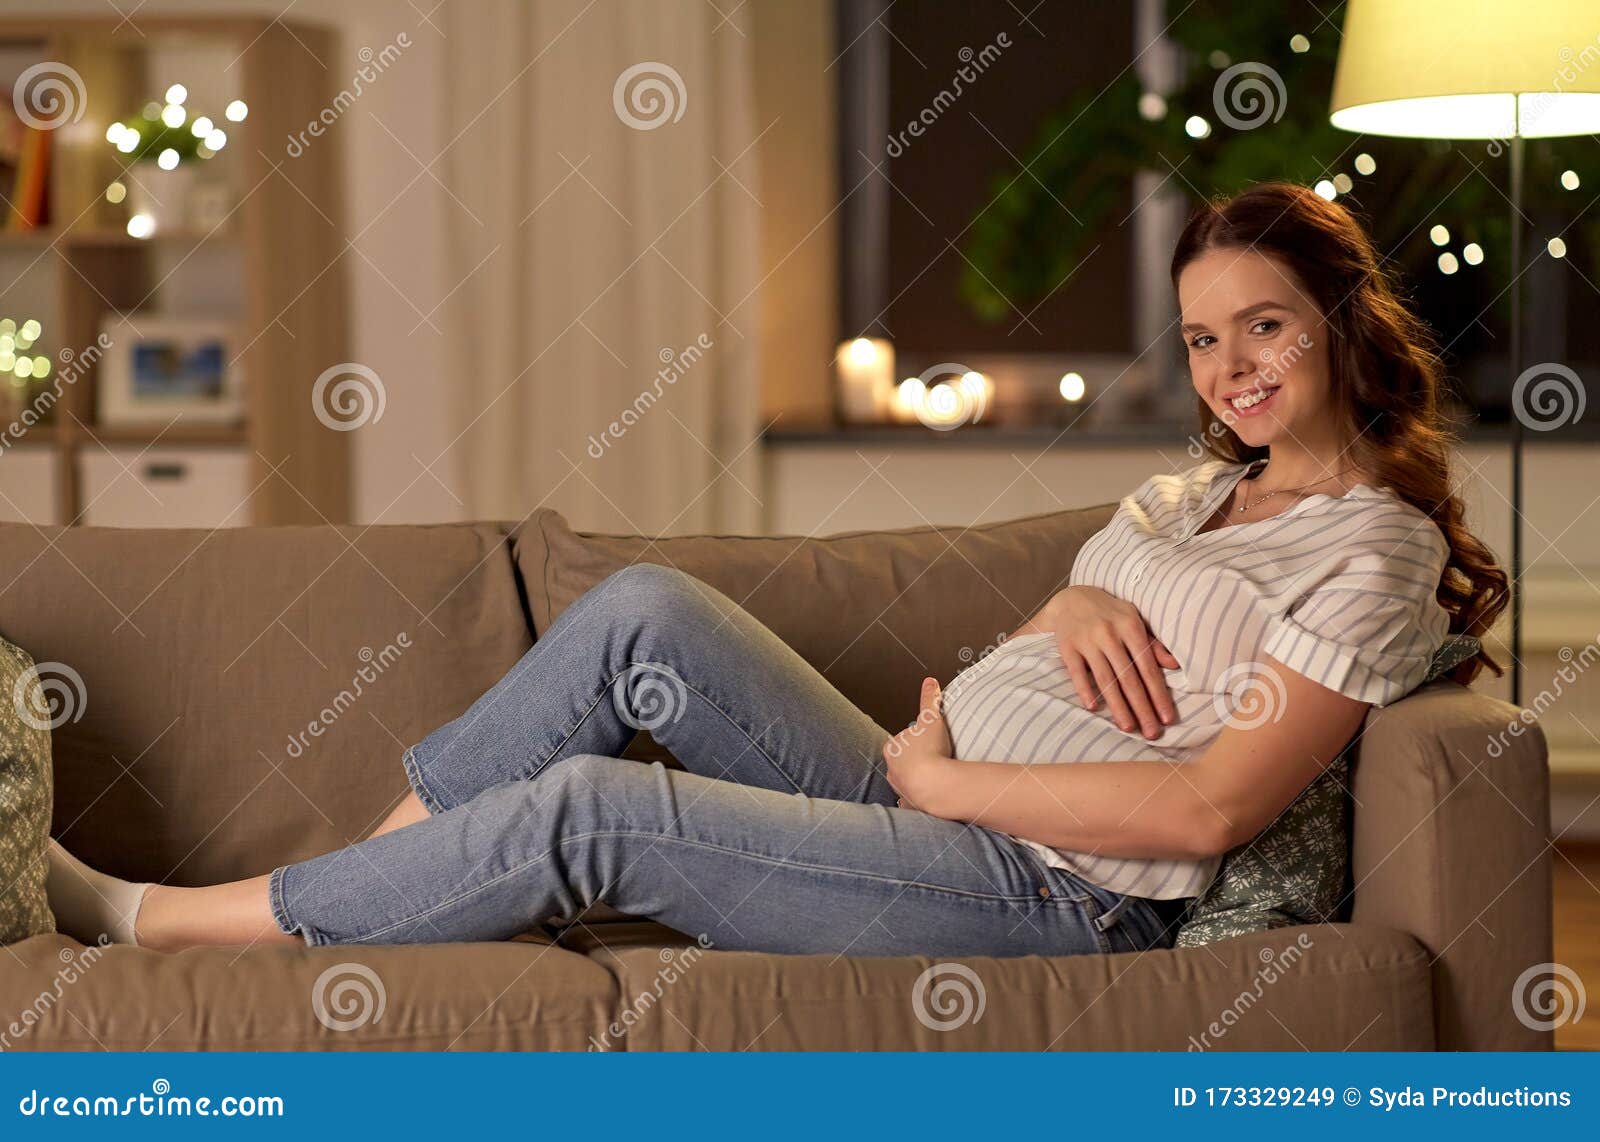 Happy Smiling Pregnant Woman On Sofa At Home Stock Image Image Of Smiling Adult 173329249 